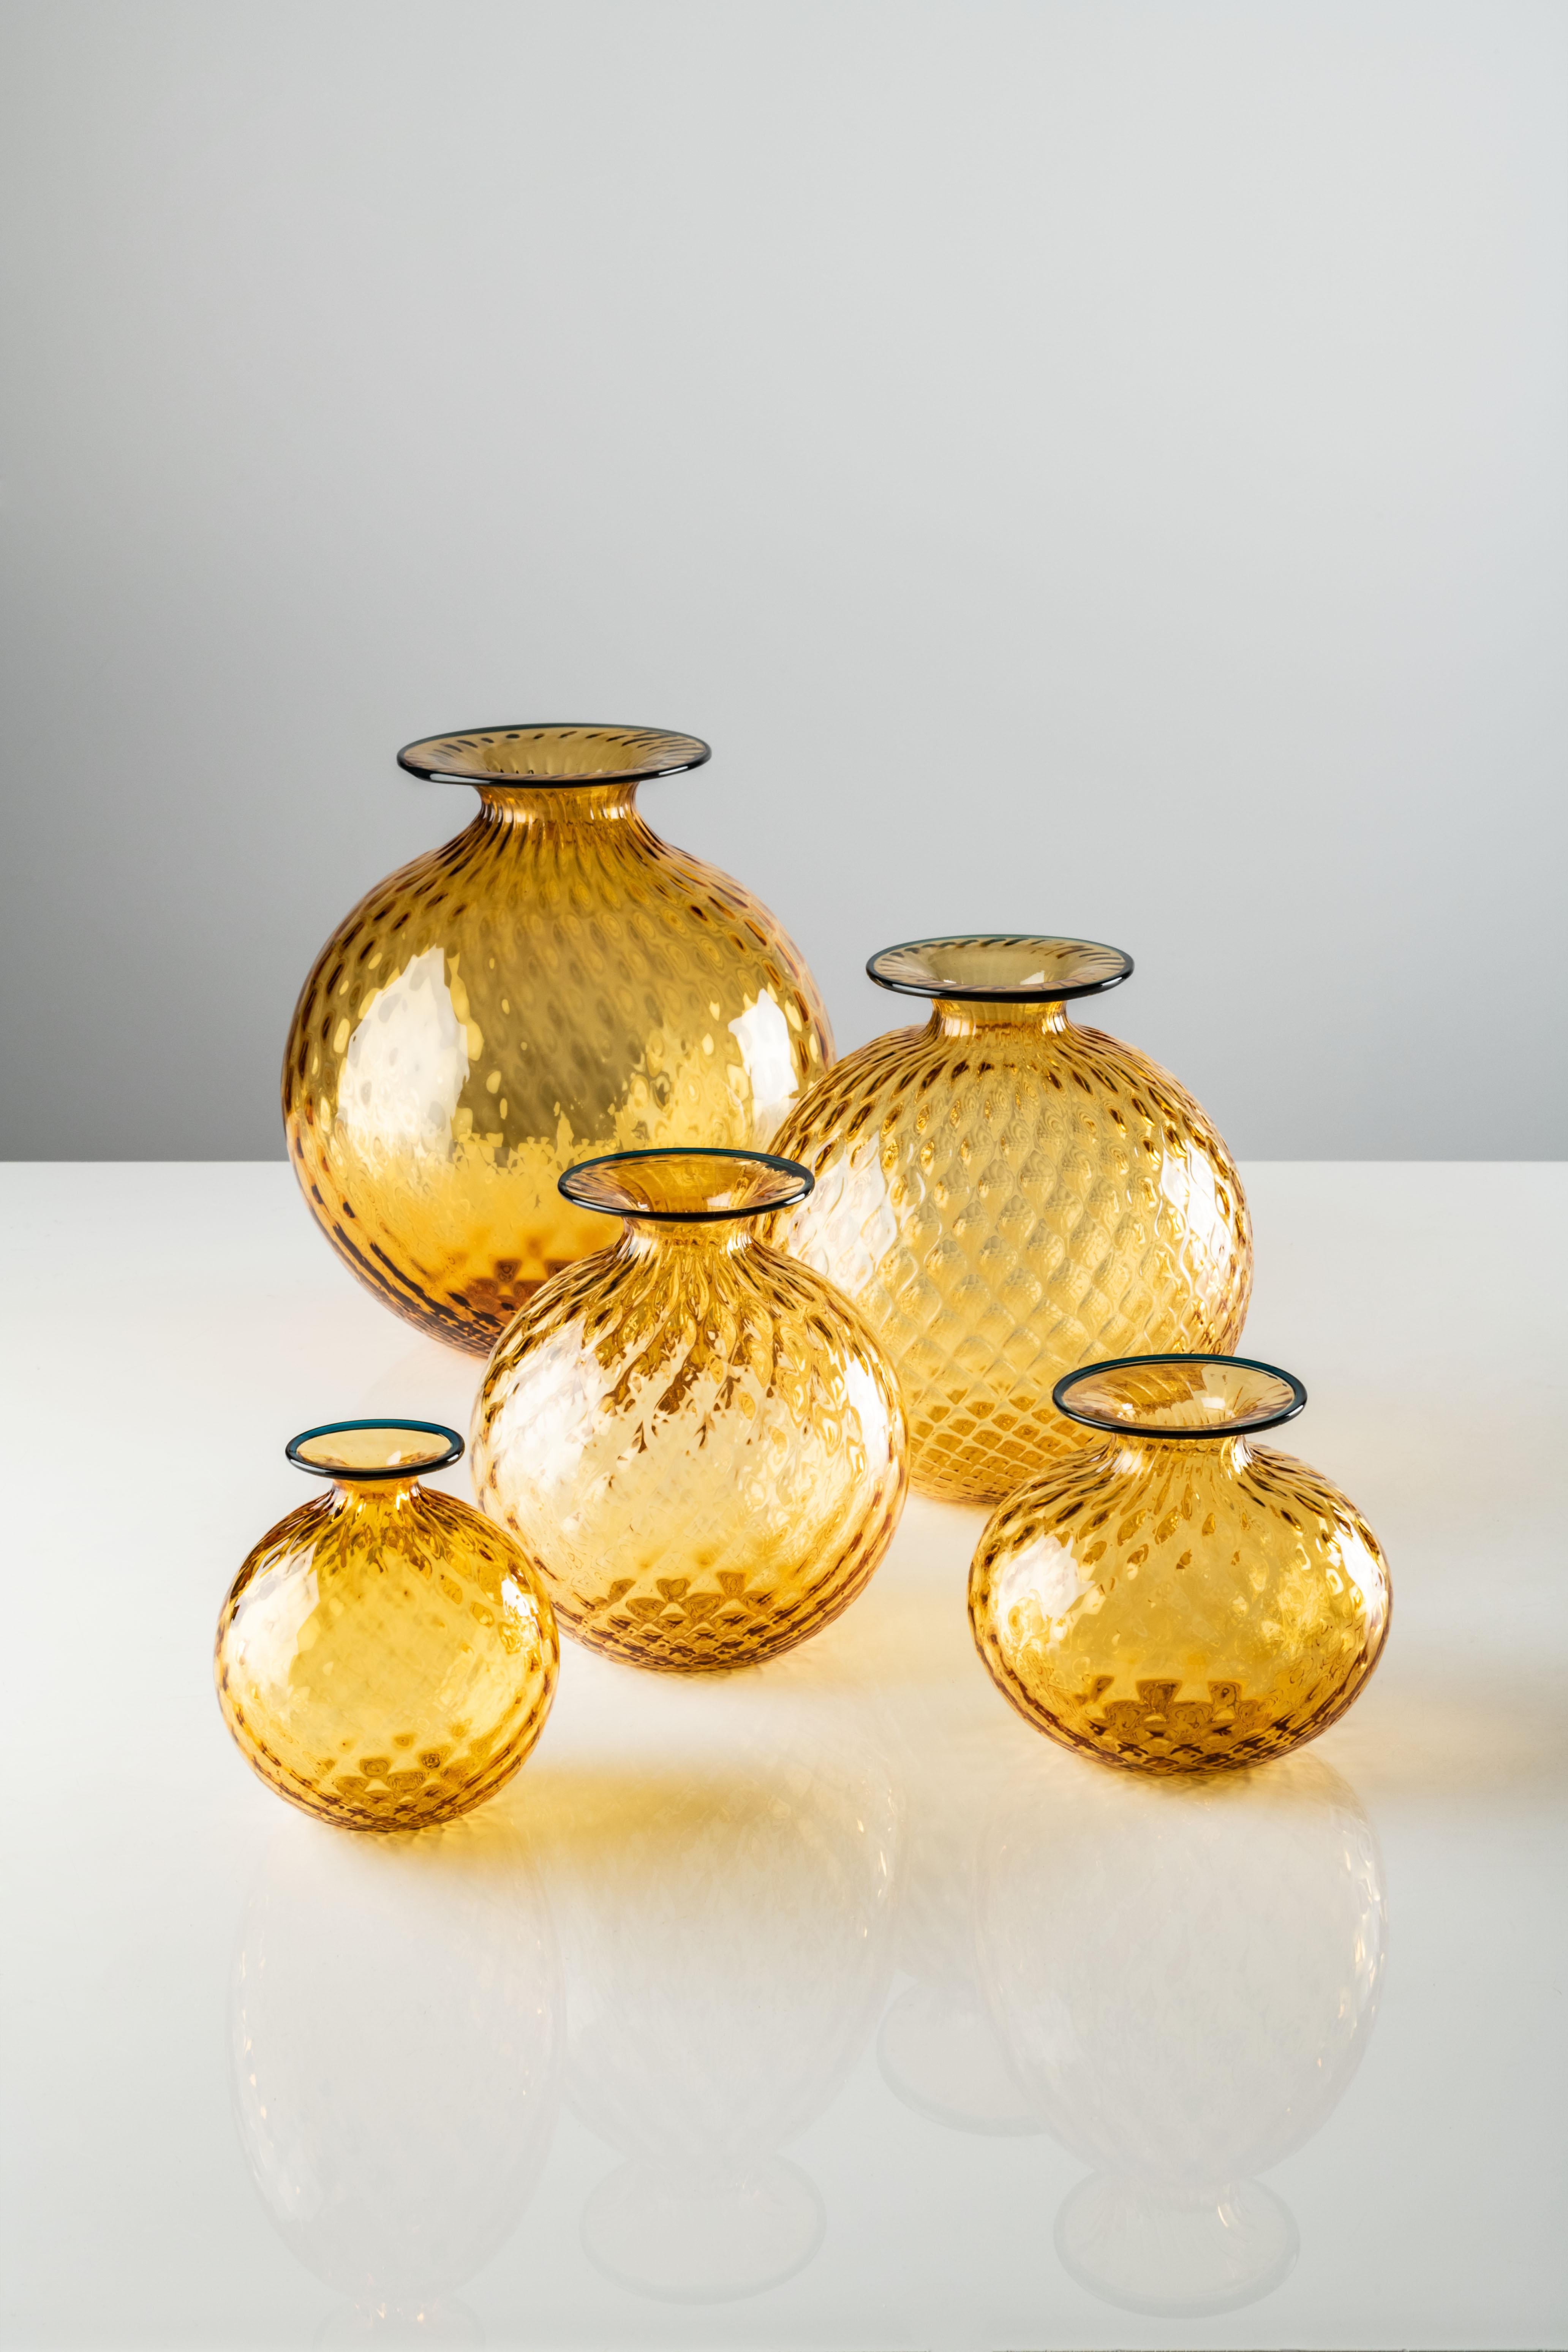 Monofiore Balloton vase in Amber Murano glass by Venini. It looks soft, but it’s not; it’s glass. The optical illusion of Monofiori by Venini from 1970 lies in its name: Balloton, a special technique that lends a unique matelassé effect to the